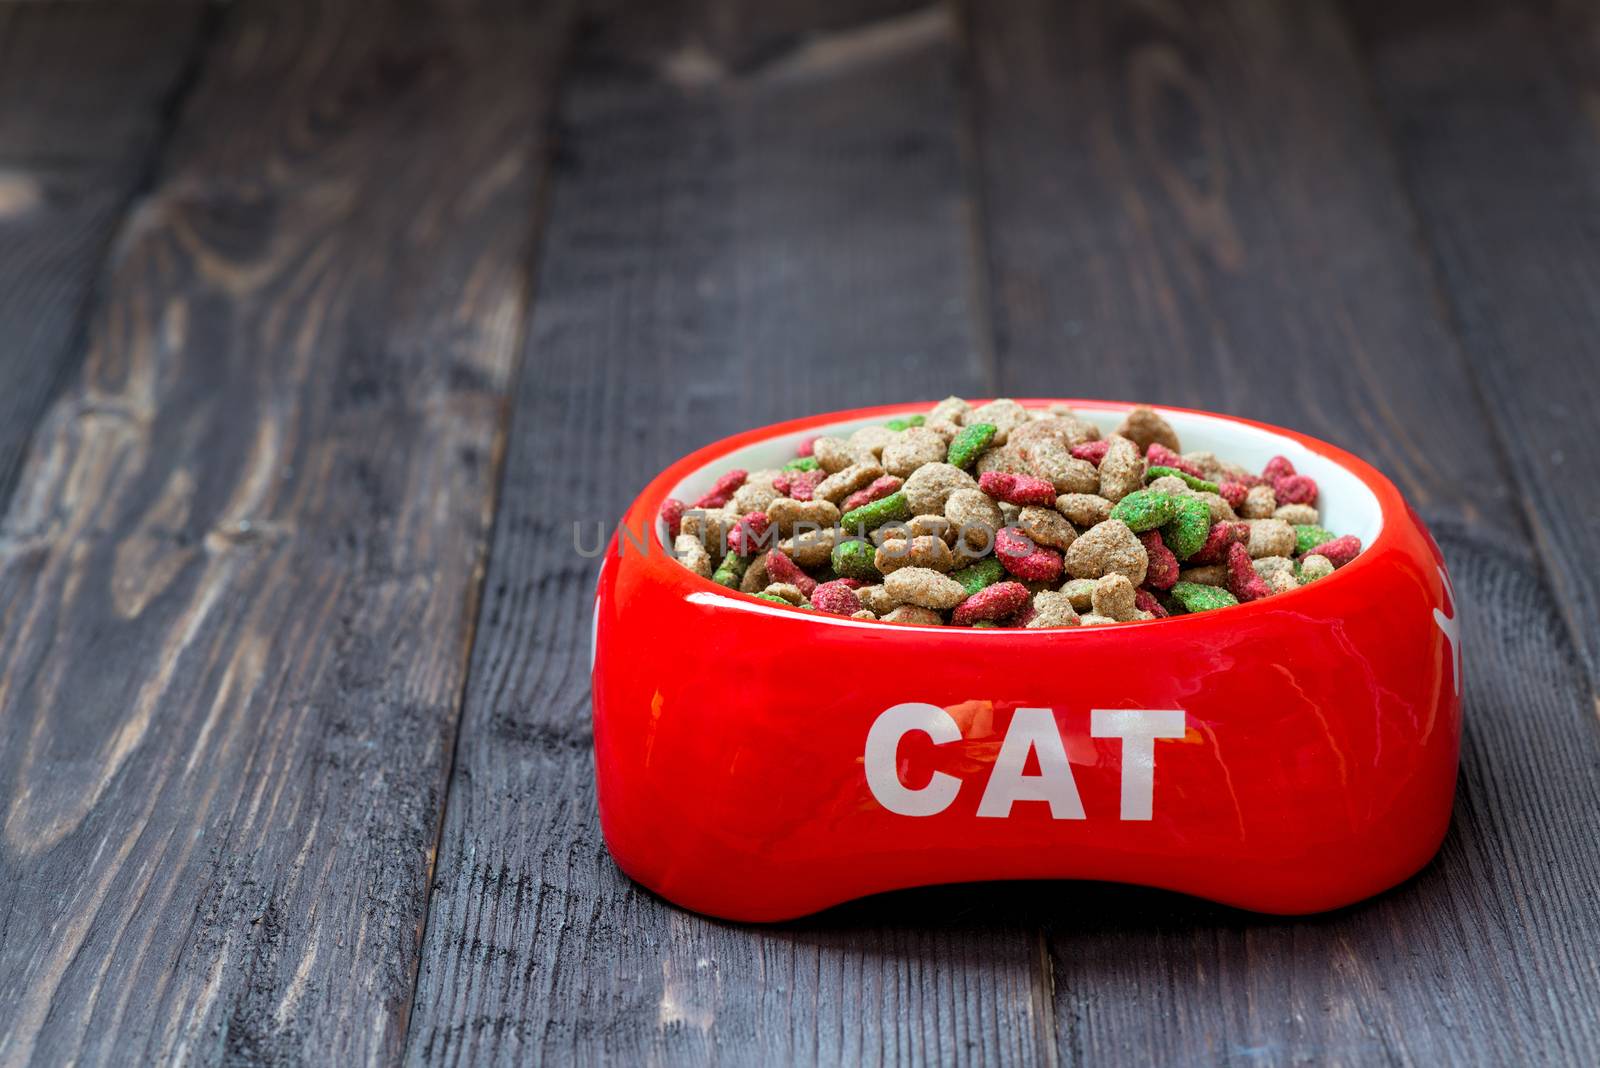 on a wooden floor a red bowl for a cat with dry food